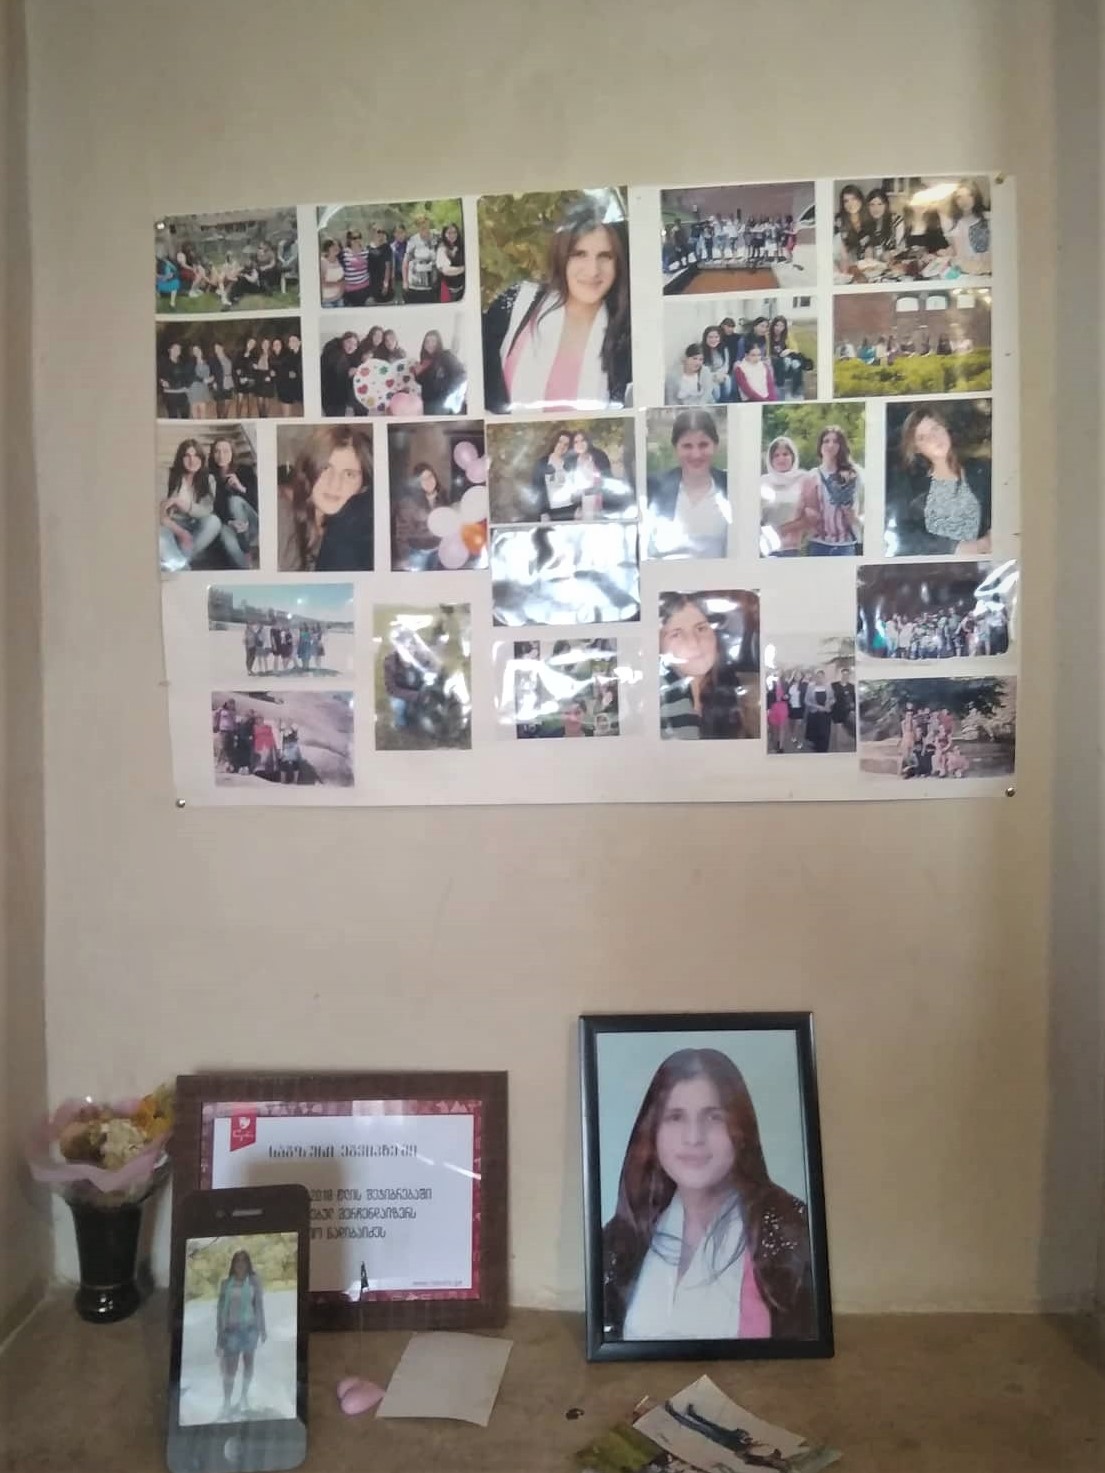 Manana Nadibaidze’s pictures in the family's new house